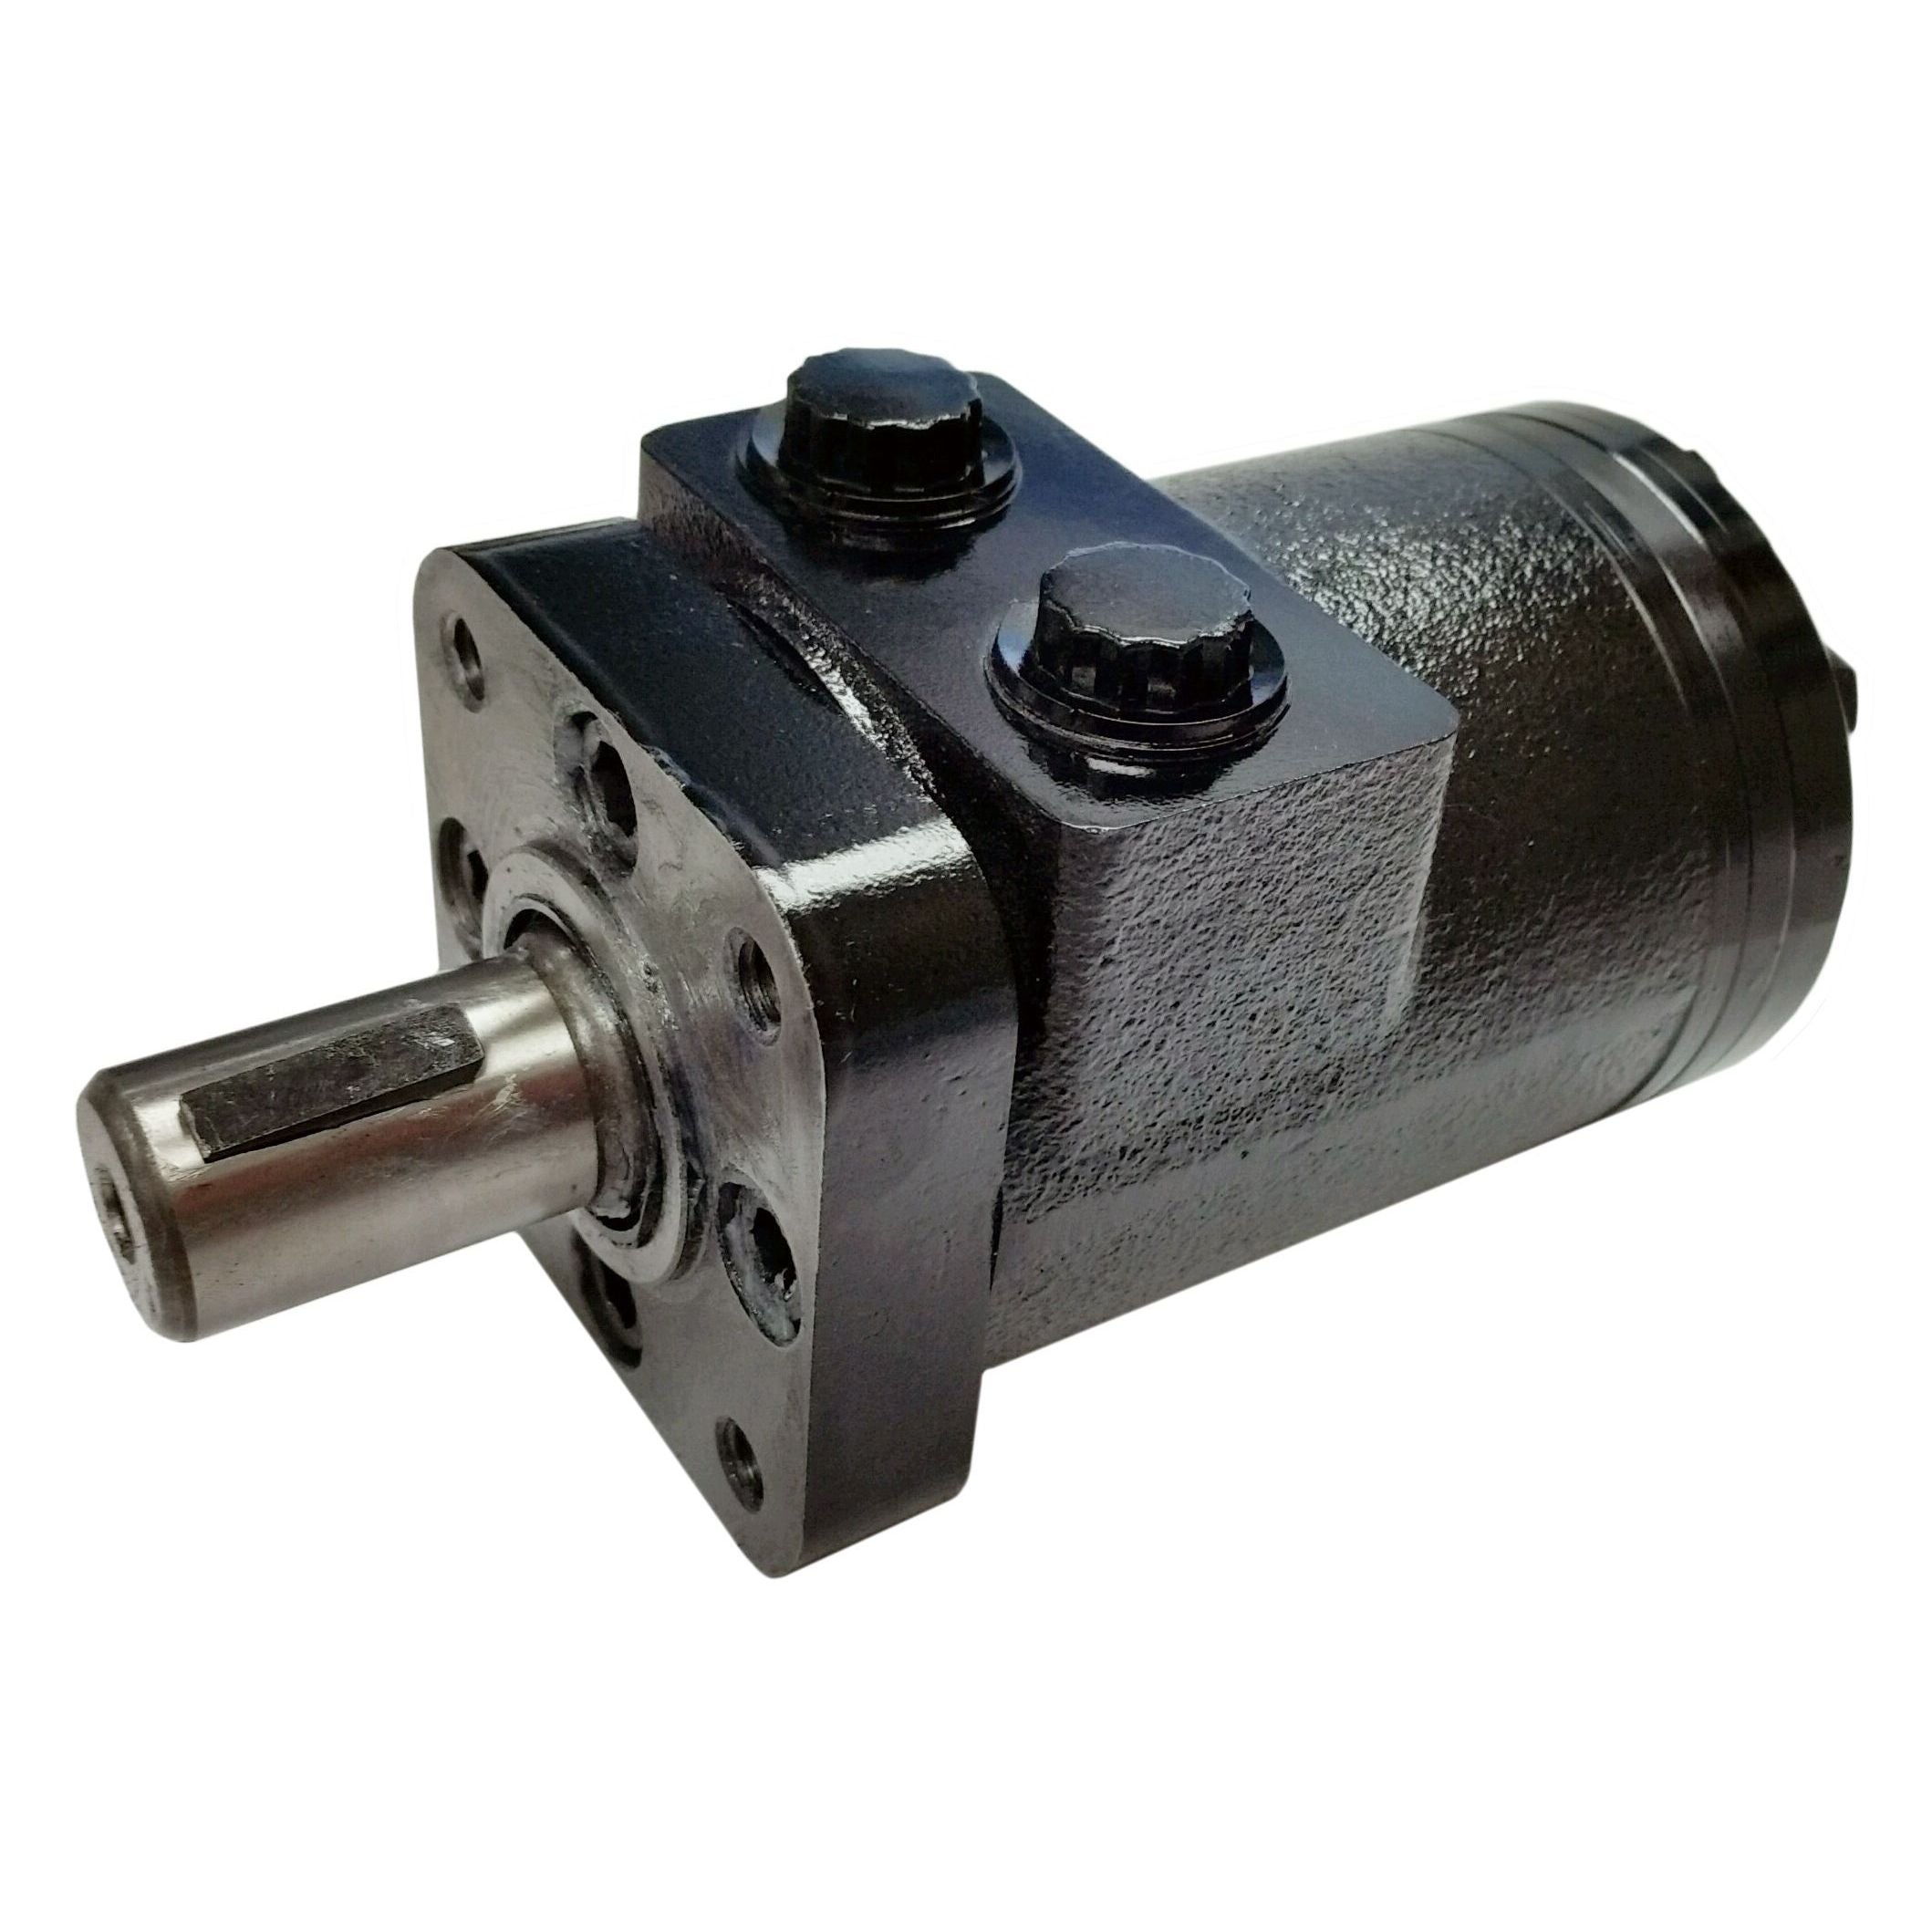 BMPH-315-H4-S-P : Dynamic LSHT Motor, 315cc, 192RPM, 3319in-lb, 1813psi Differential, 15.85GPM, SAE A 4-Bolt Mount, 6-Tooth Shaft, Side Ported, 1/2" NPT